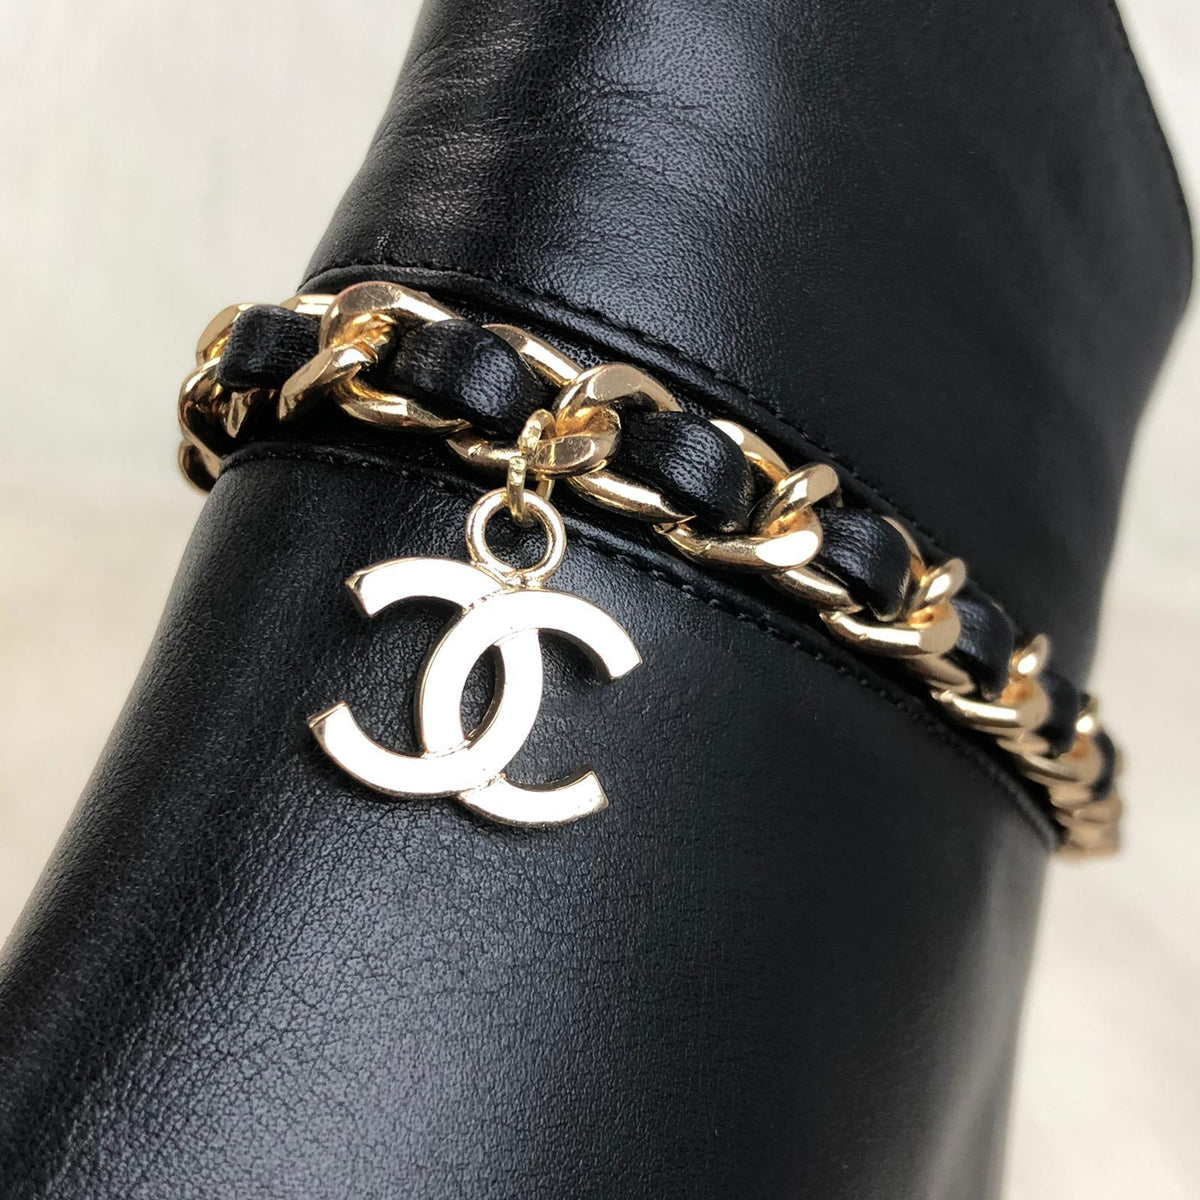 chanel booties with chain